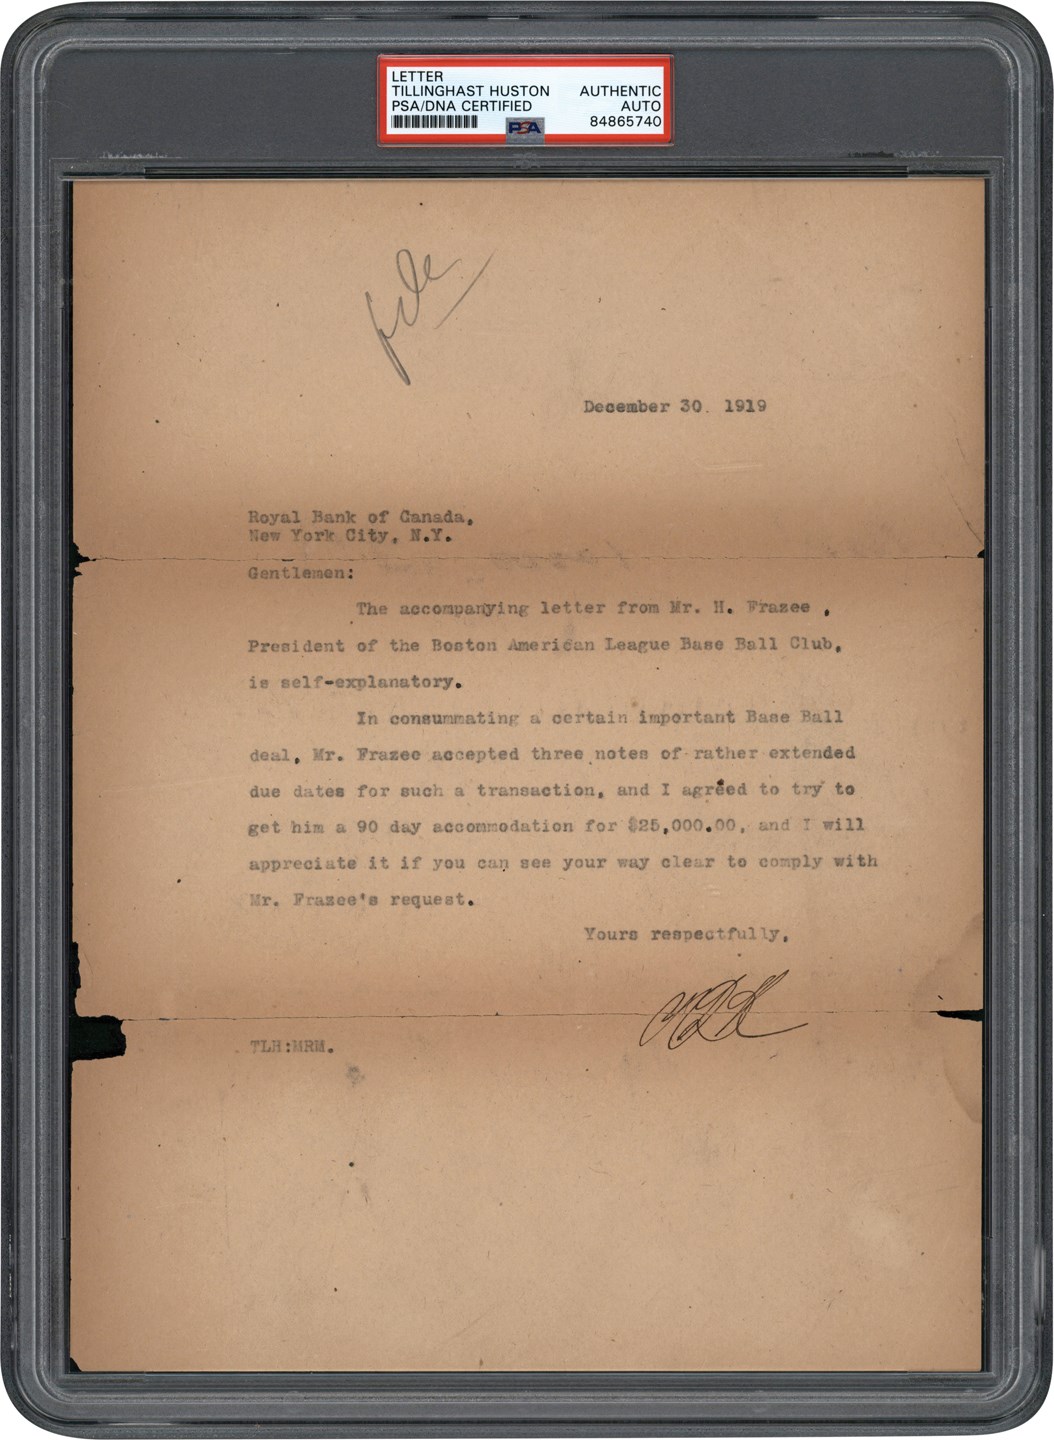 - December 30th, 1919, Colonel Huston Letter "Consummating a Certain Important Base Ball Deal" aka The Babe Ruth Sale (ex-Barry Halper Collection)